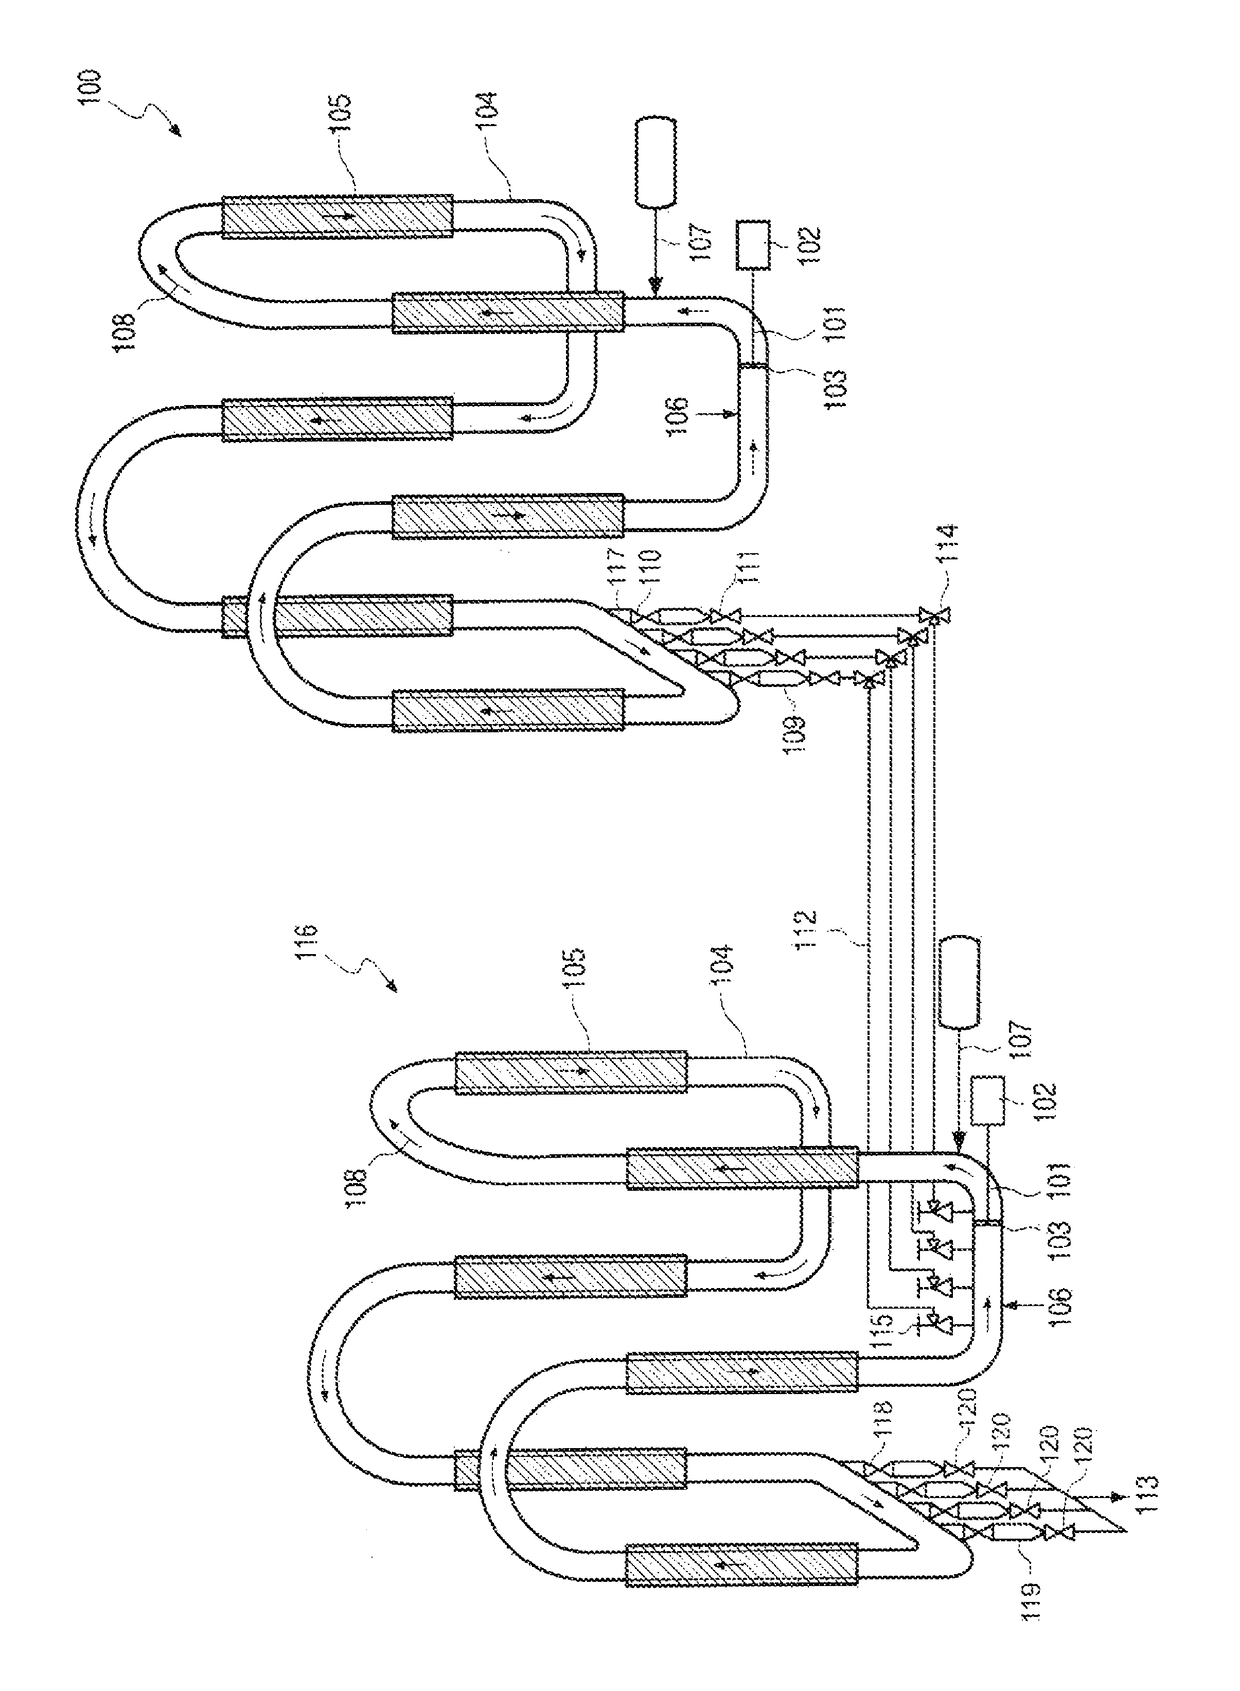 Olefin polymerization process with continuous transfer